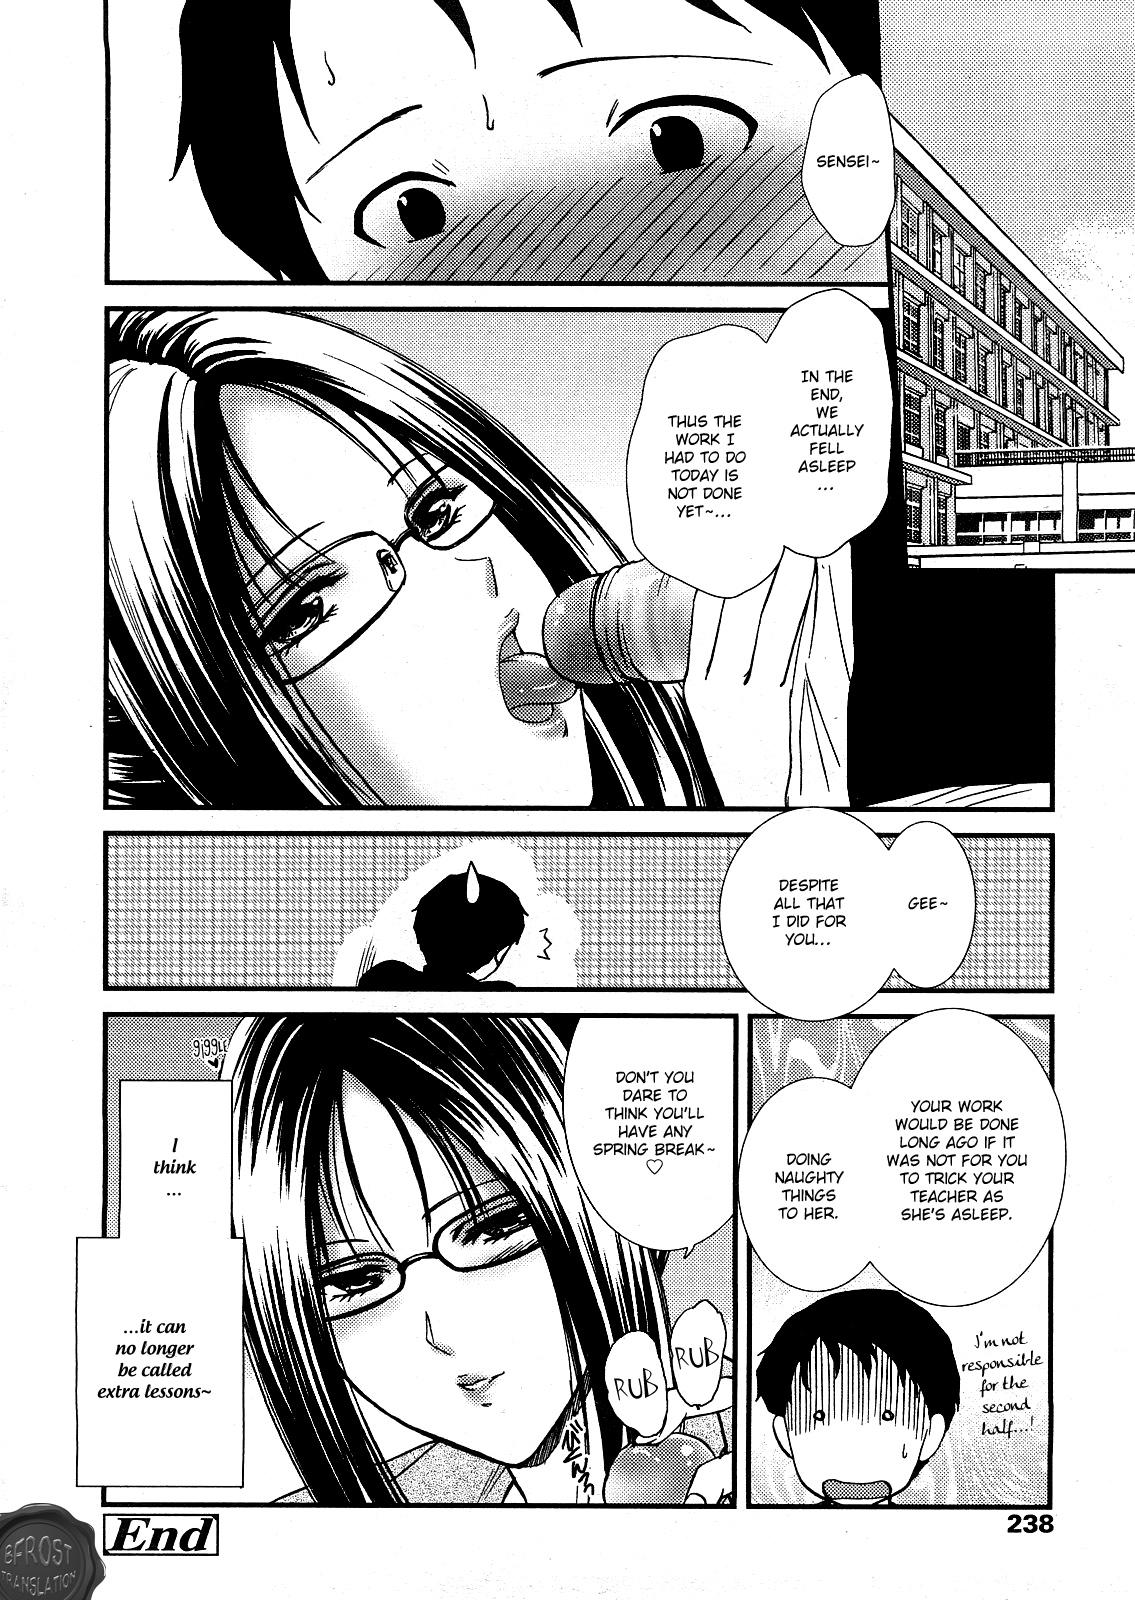 Casa Hoshuu no Ojikan | It's Time for Extra Lessons Porn - Page 20